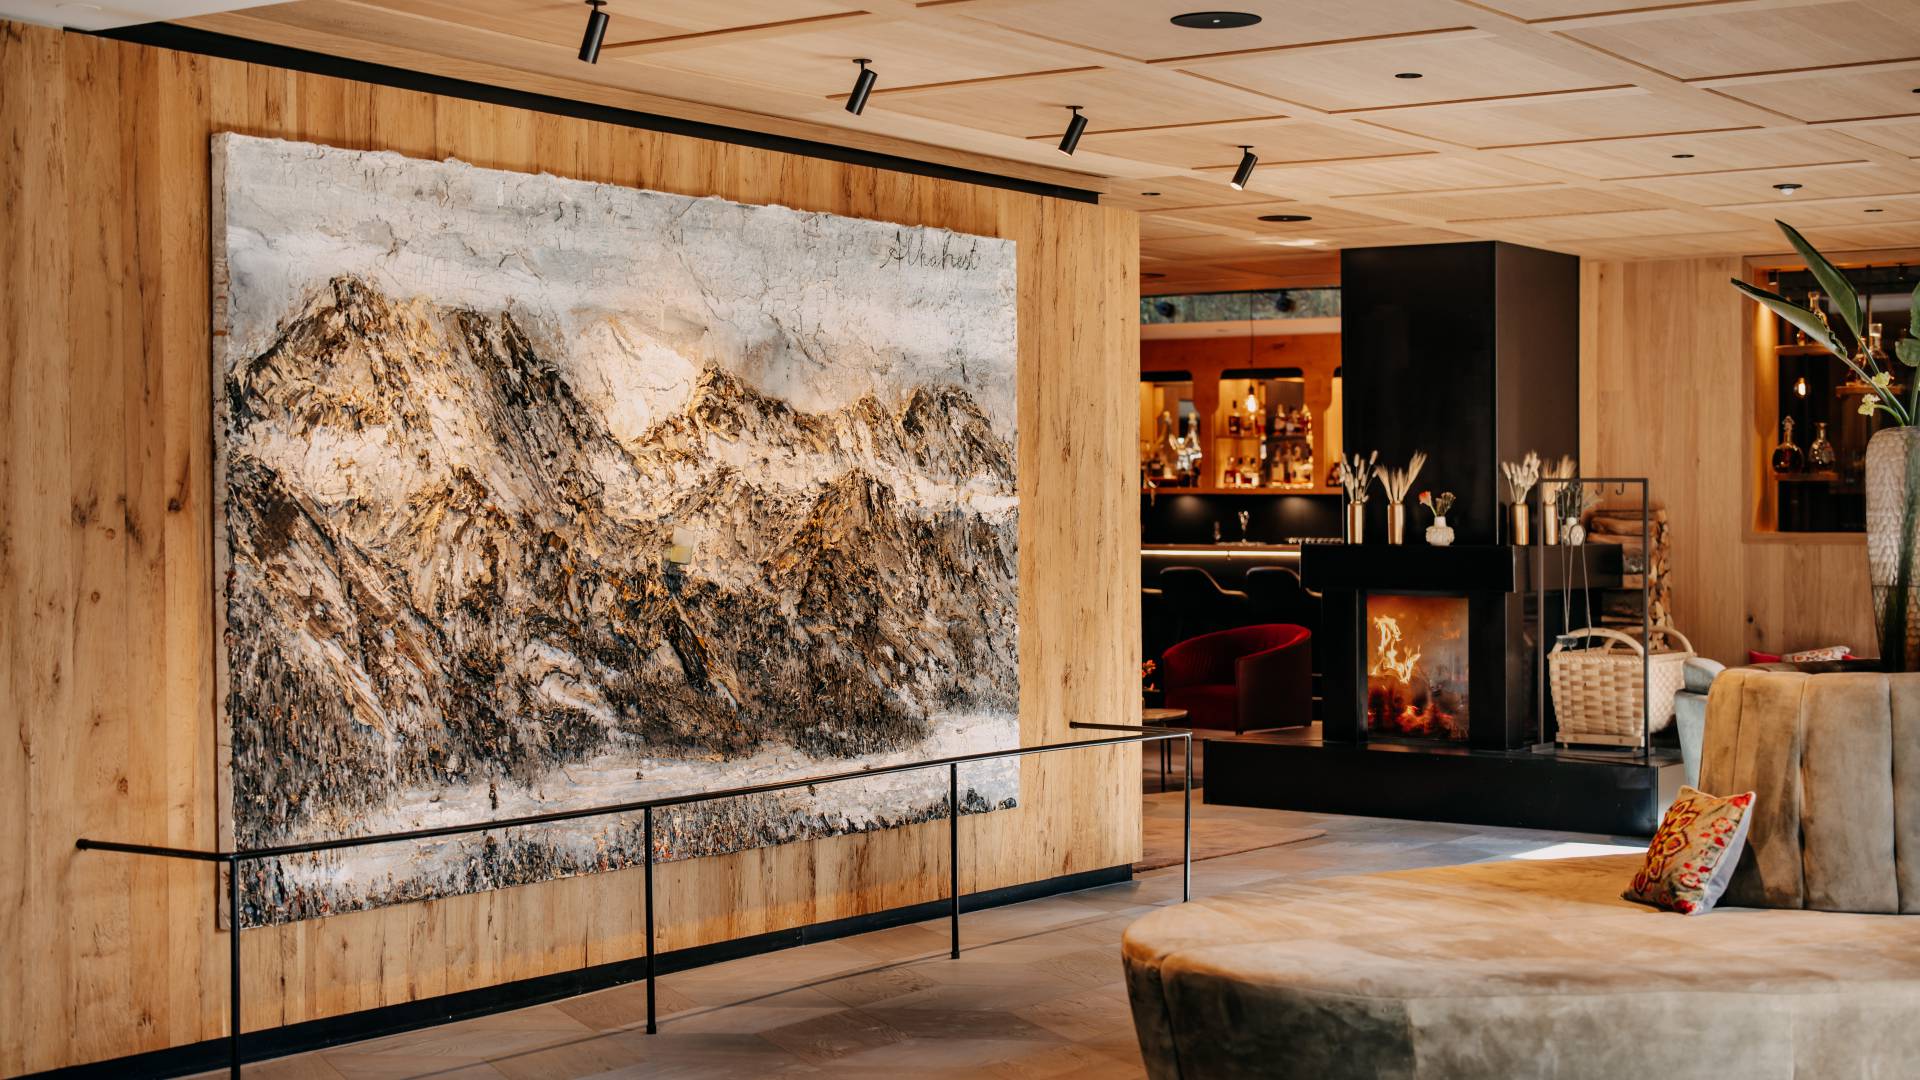 the artwork Alkahest created in 2011 by Anselm Kiefer in the lobby of the Naturhotel Forsthofgut